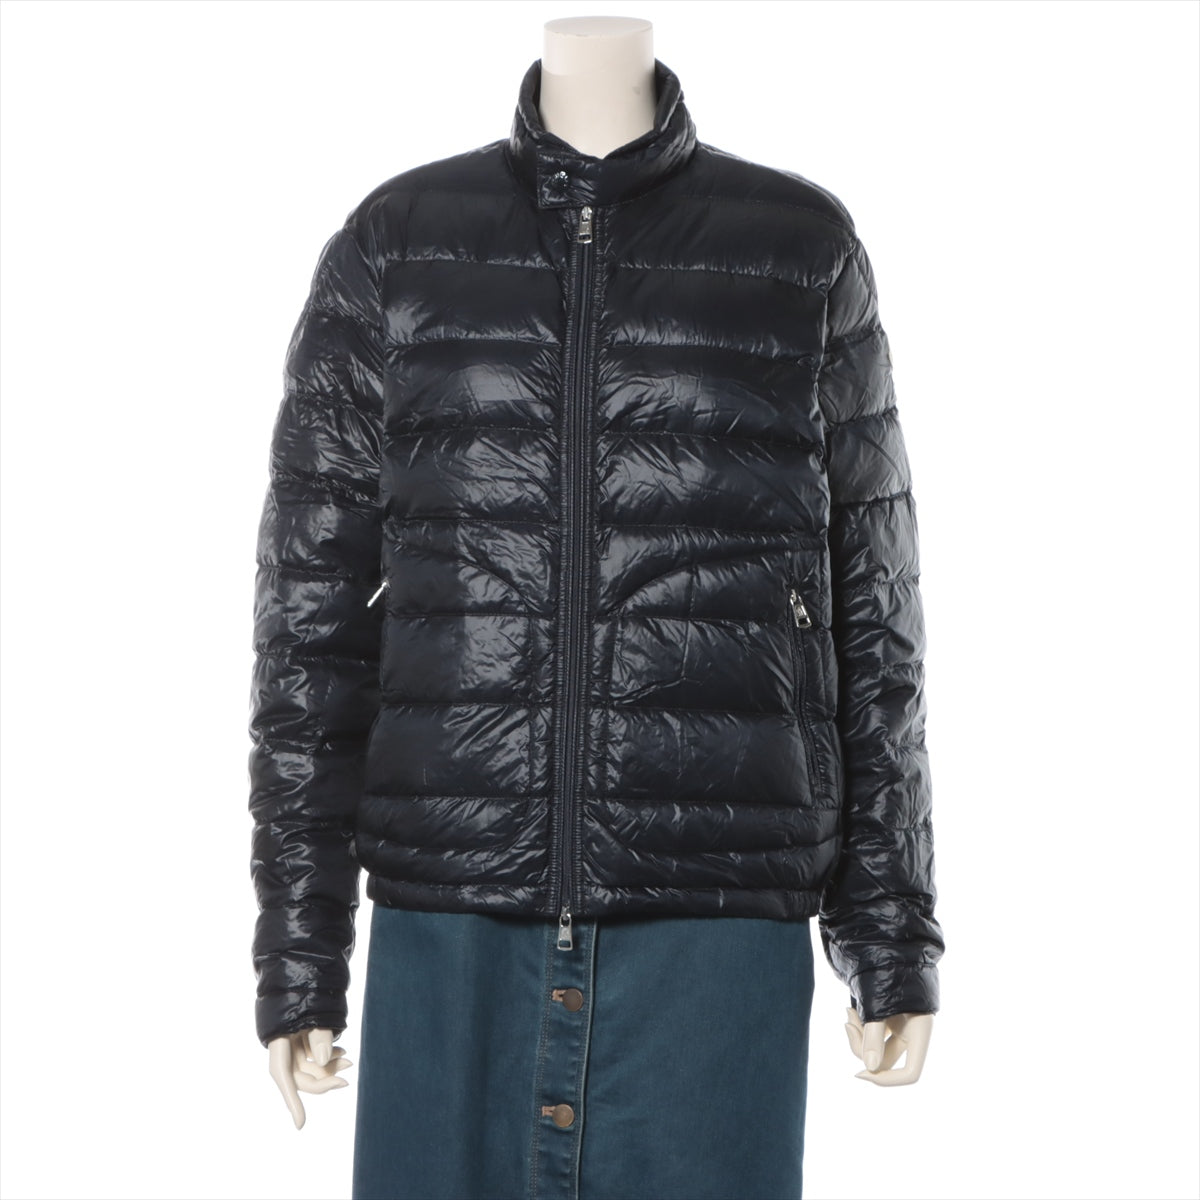 Moncler ACORUS 17 years Nylon Down jacket 1 Men's Navy blue  Comes with a storage bag